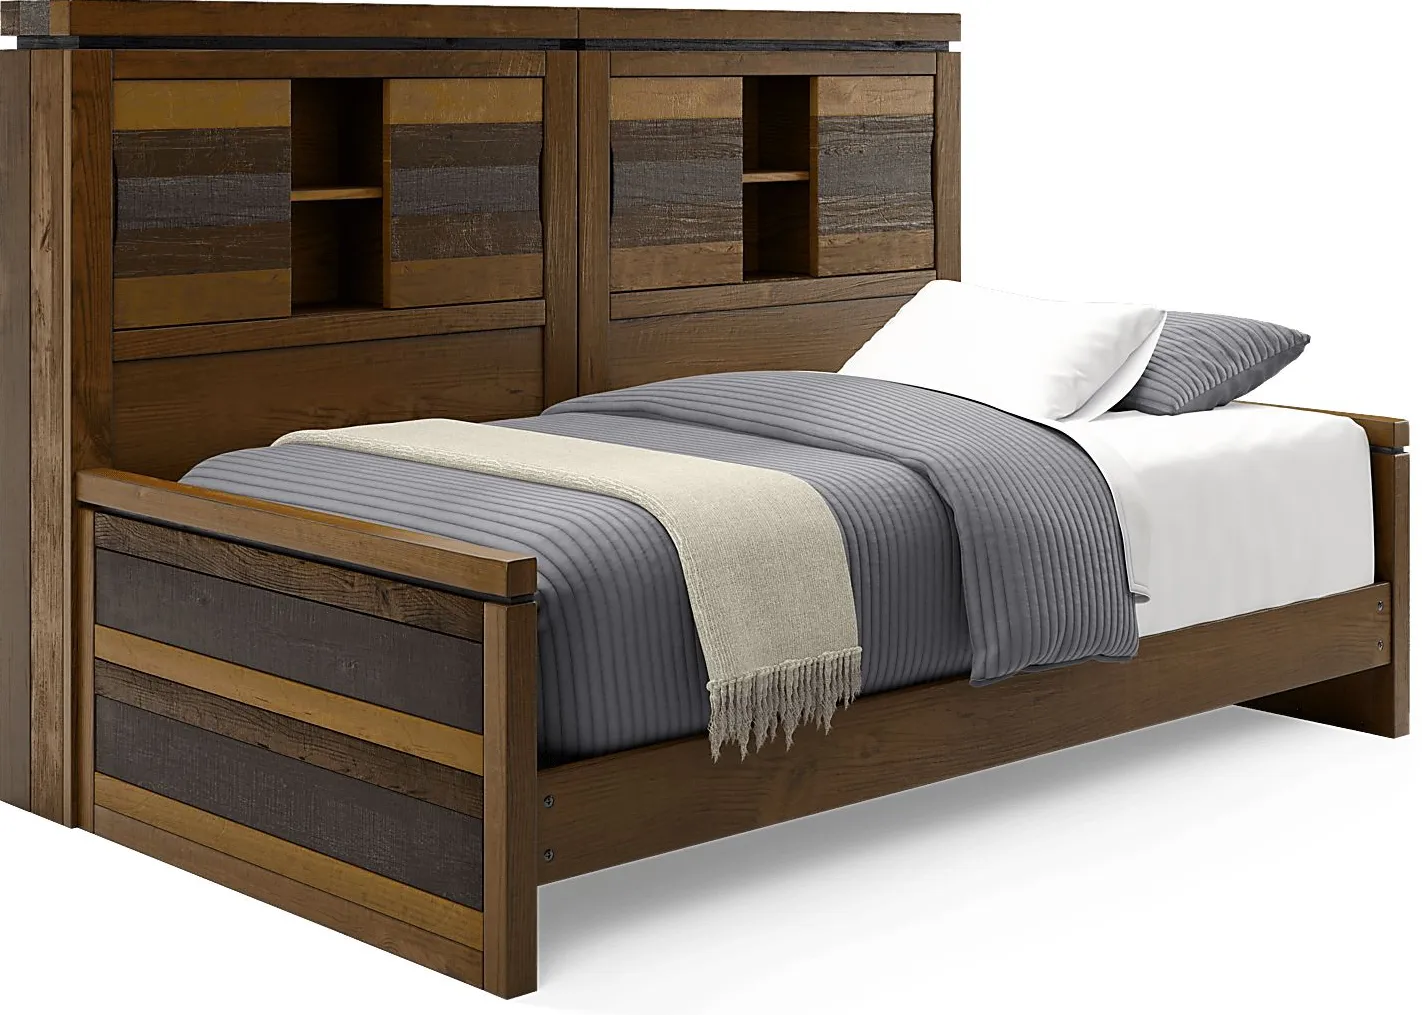 Kids Westover Hills Jr. Reclaimed Brown 3 Pc Twin Bookcase Wall Bed